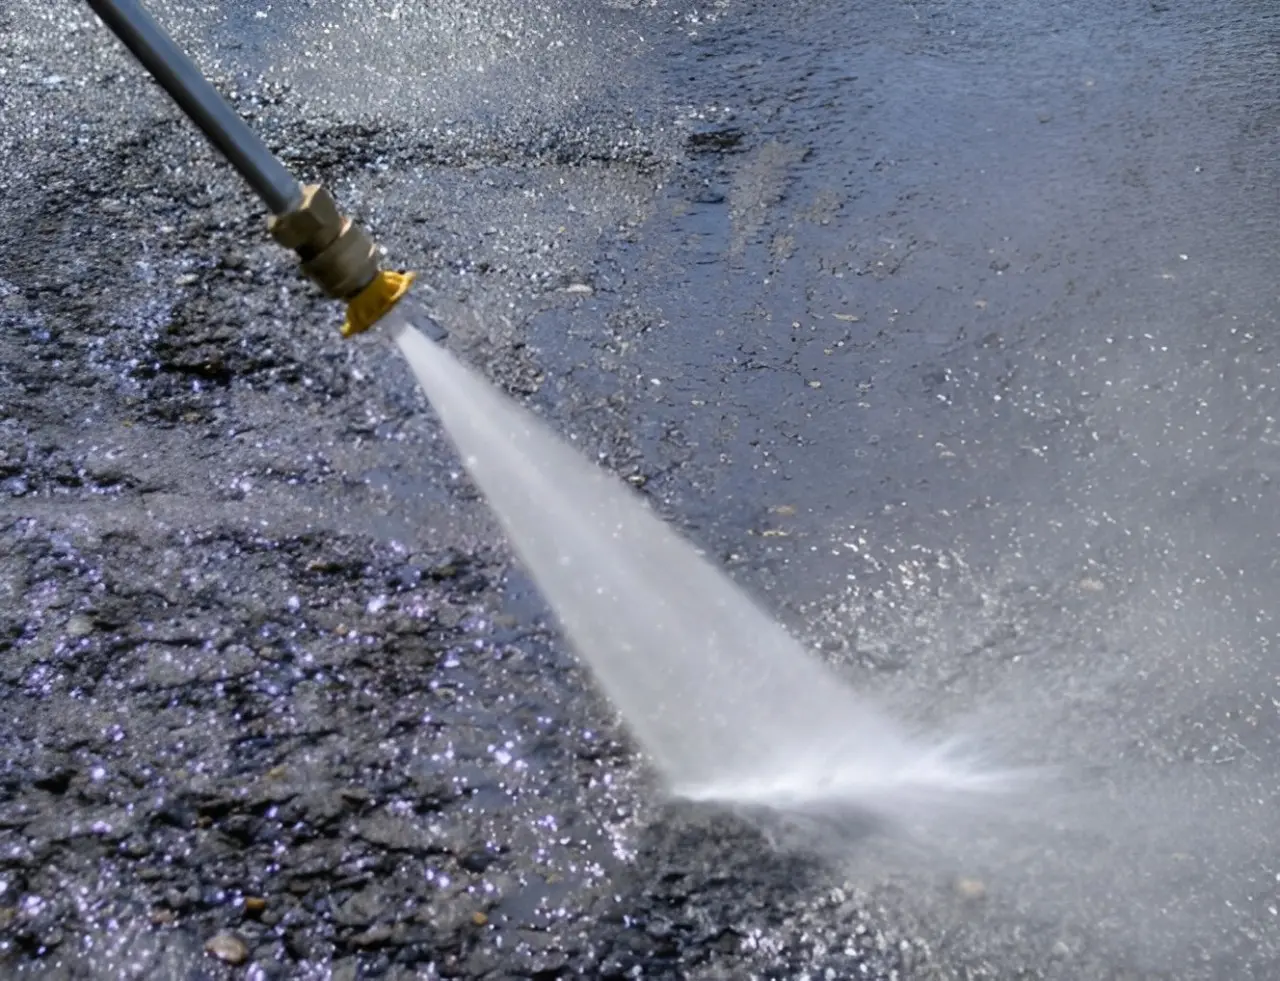 A water jet spraying out of the ground.